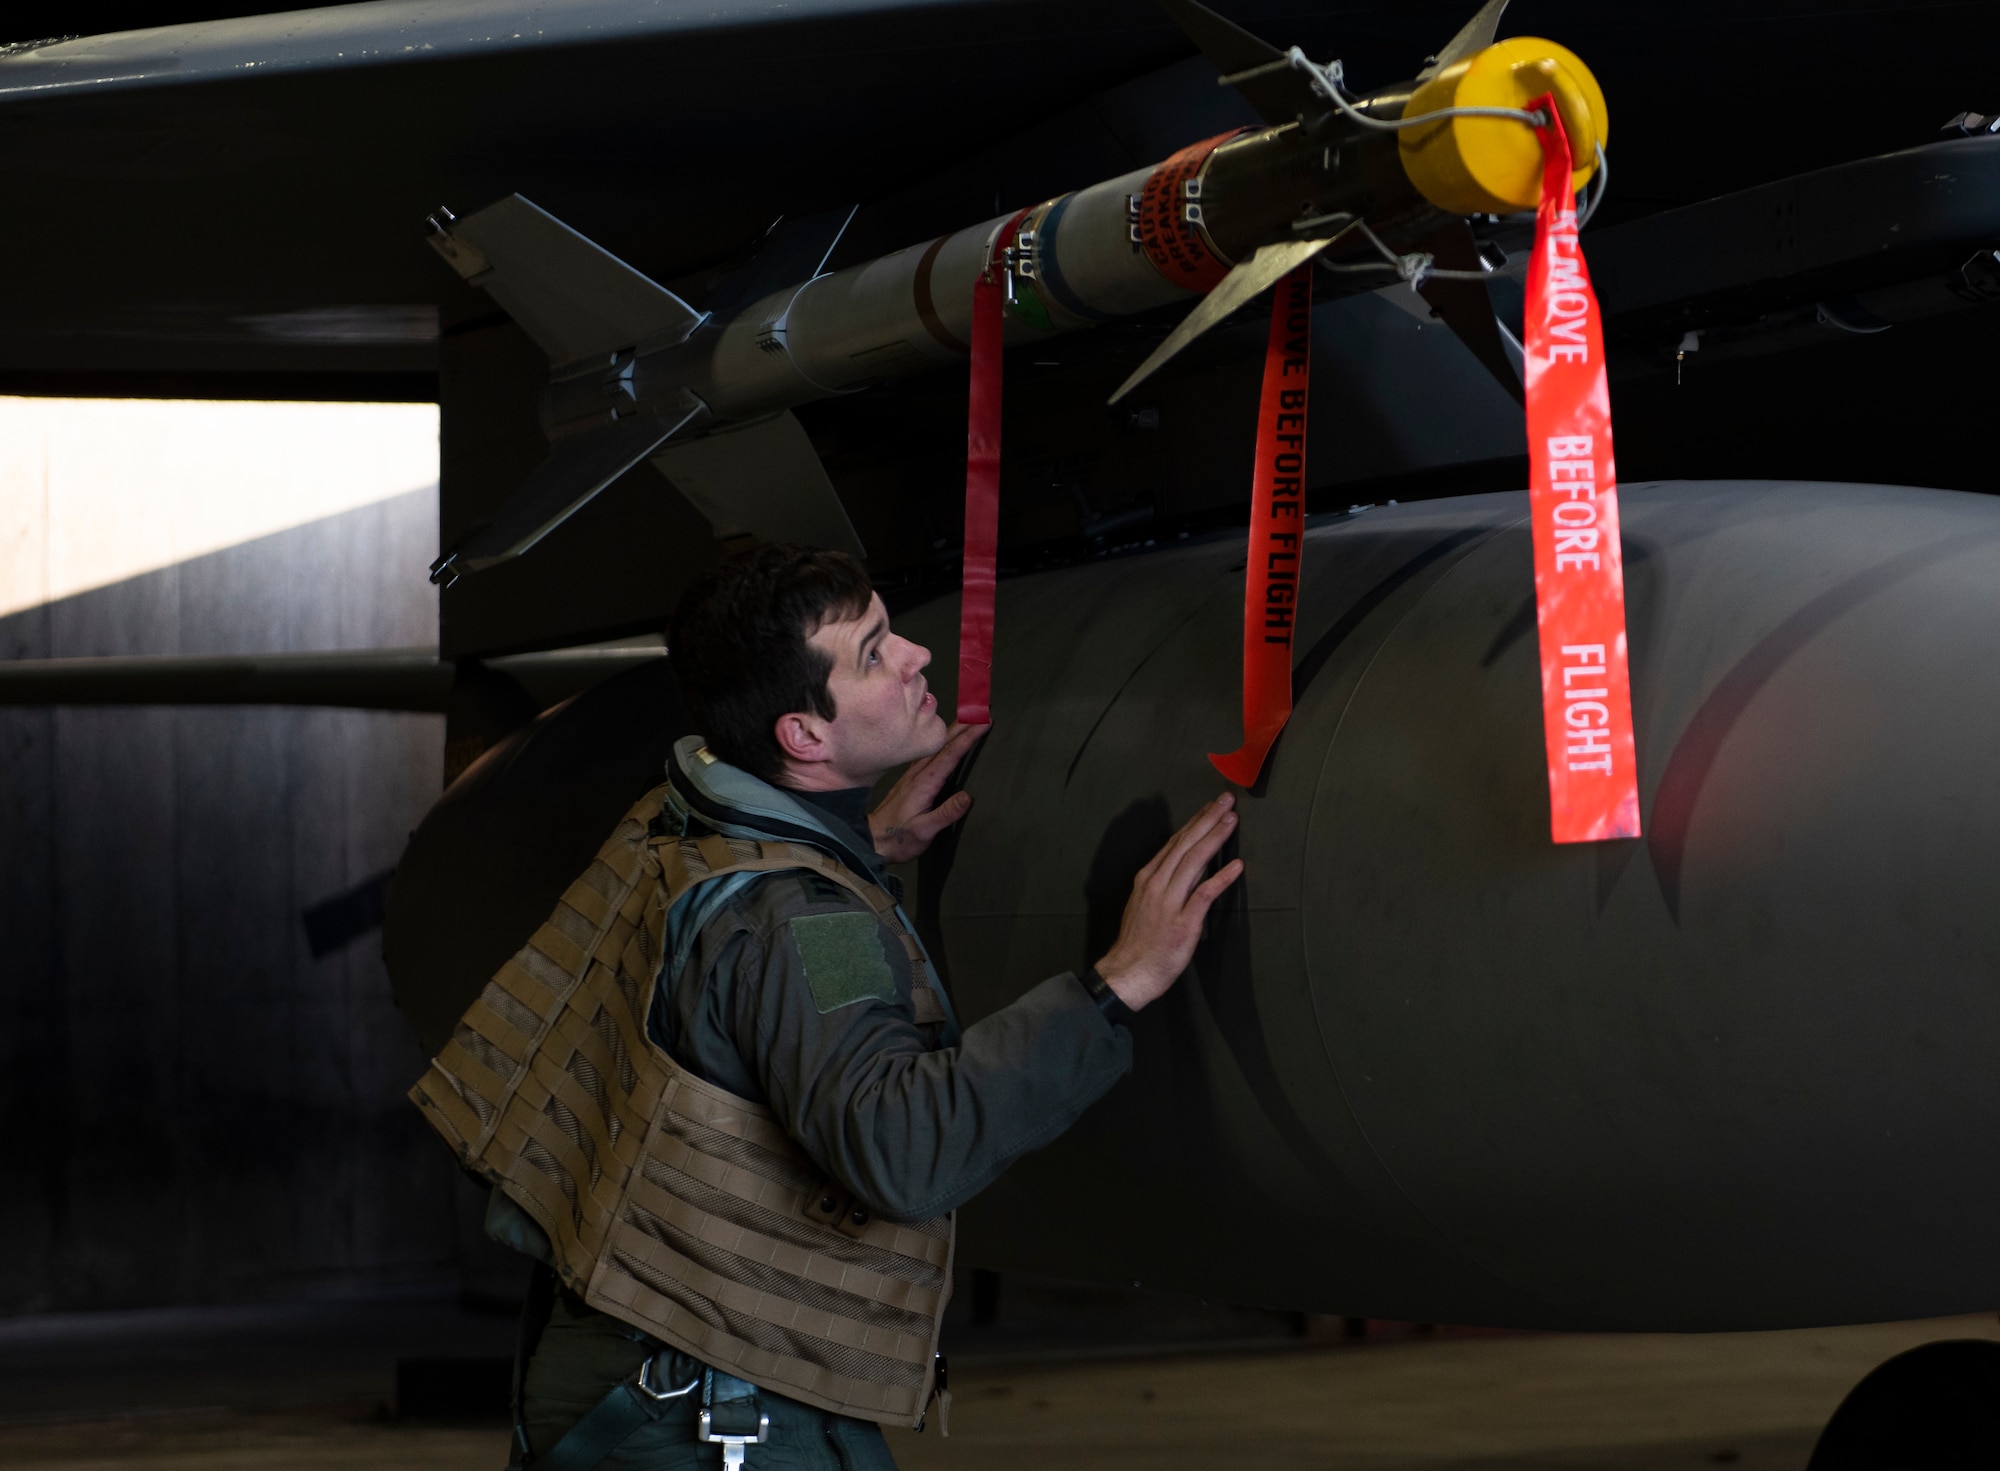 U.S. Air Force Capt. John Bynum, an electronic combat pilot assigned to the 493rd Fighter Squadron, inspects a NATM-9M missile during pre-flight checks at Royal Air Force Lakenheath, England, Dec. 8, 2020. 48th Fighter Wing pilots participated in a live missile fire exercise, gaining combat representative training that can't be fully imitated in a simulation during day-to-day training. (U.S. Air Force photo by Airman 1st Class Jessi Monte)